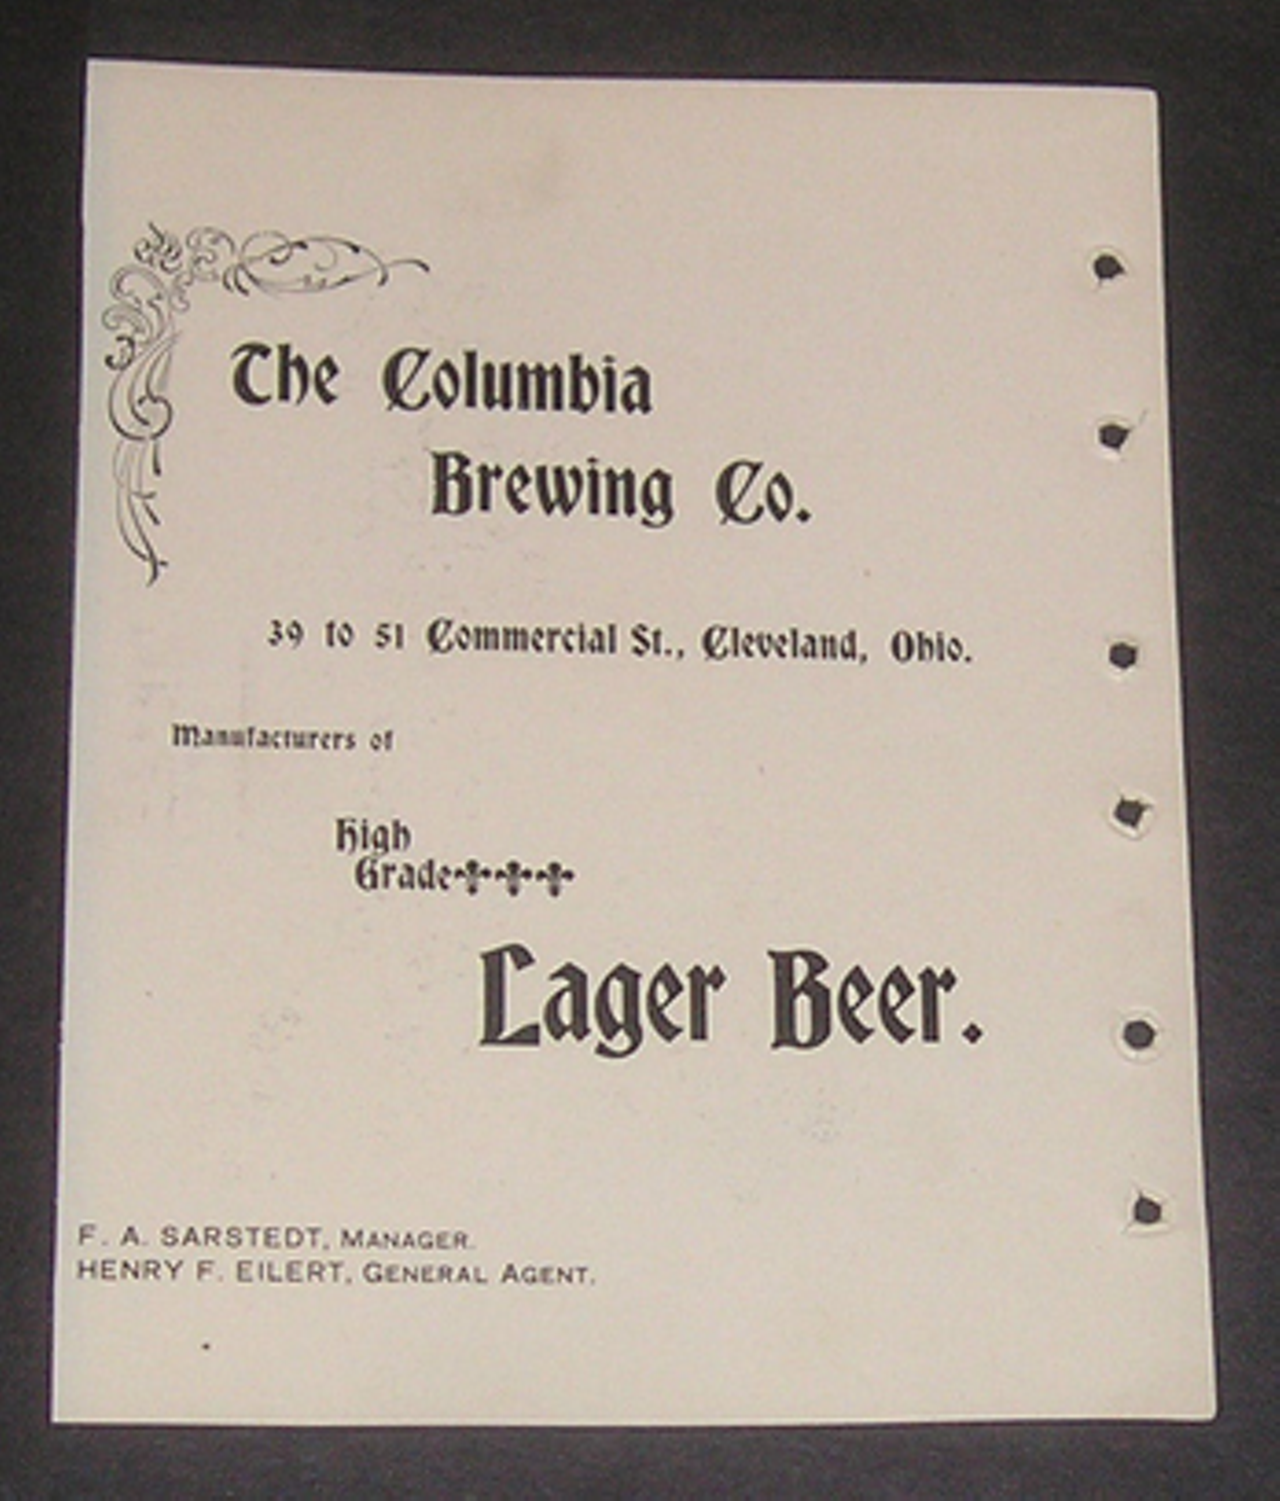 The Columbia Brewing Company was another one of the 11 breweries that was incorporated into the Cleveland and Sandusky Brewing Company. It was located Commercial Street.